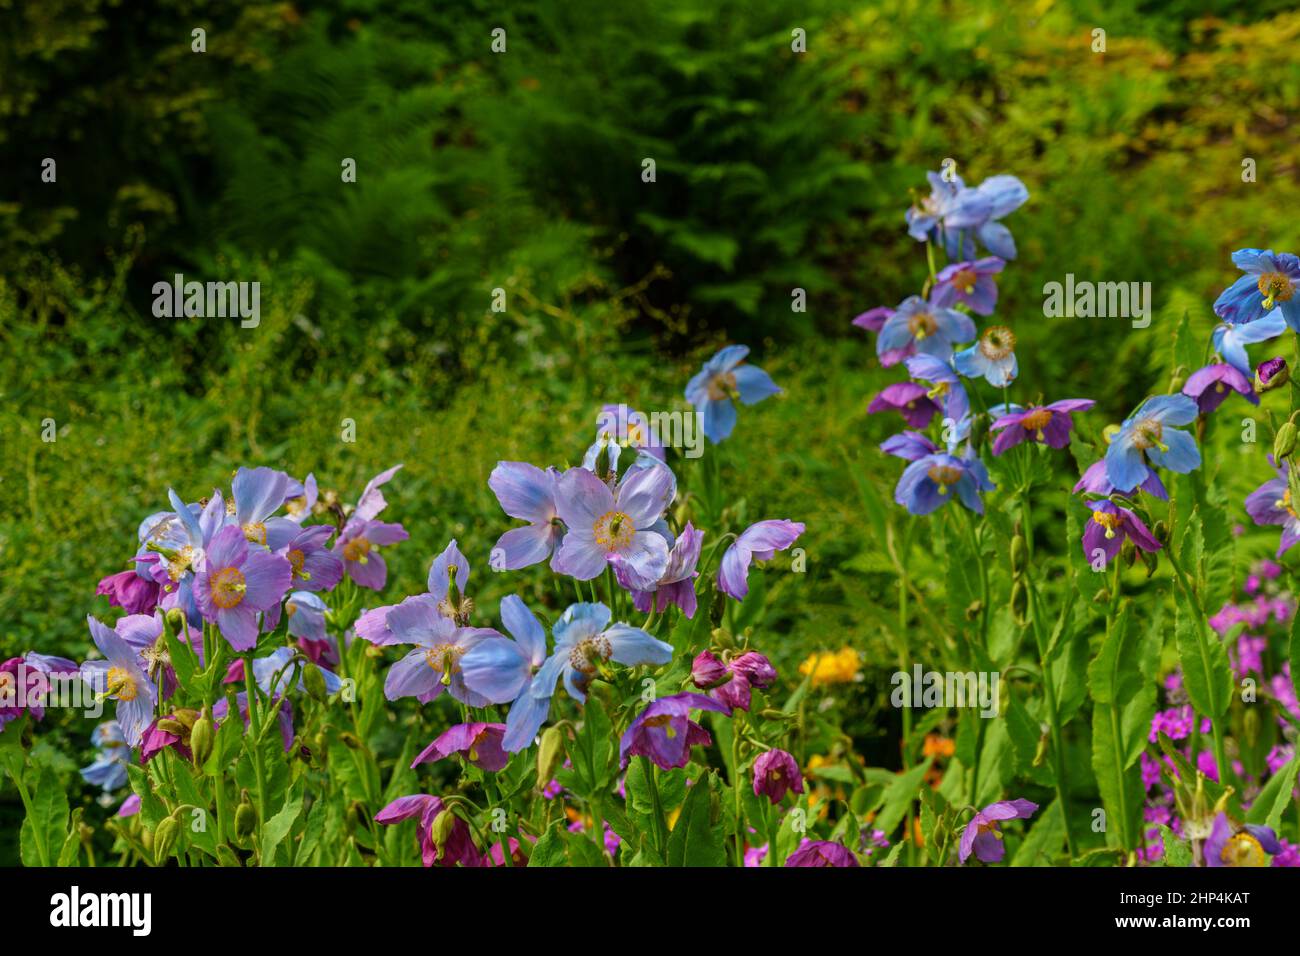 Clusters of beautiful Himalayan poppies in azure and violet against a lush green background. Stock Photo